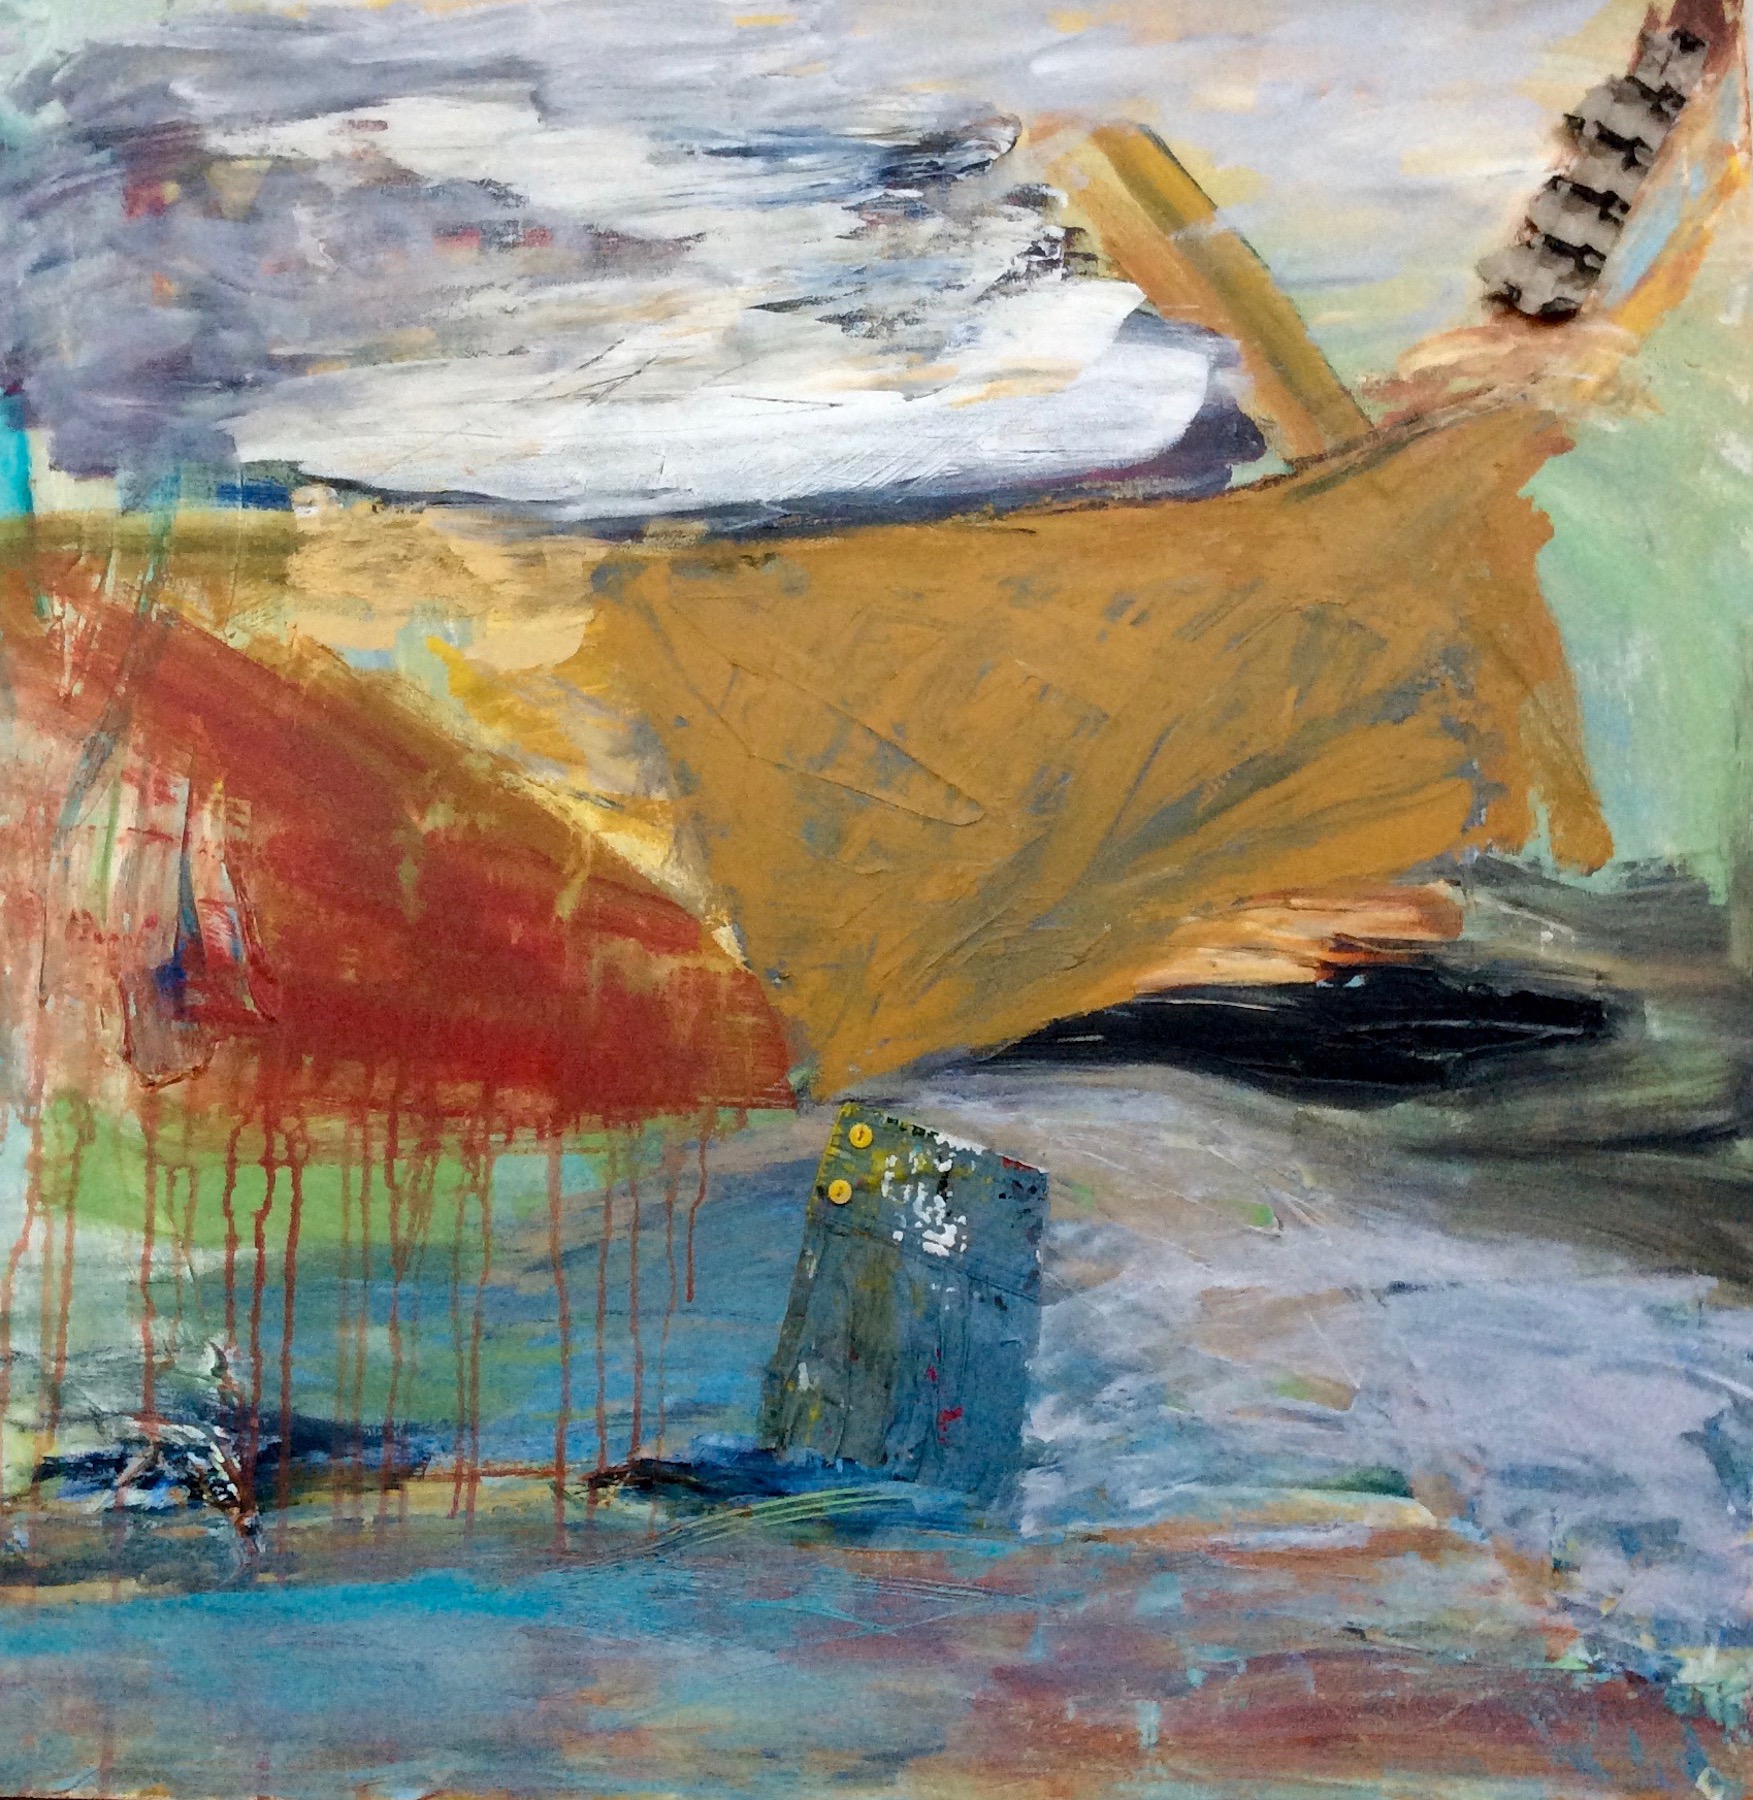   Refugee Ship with Shirtcuff , acrylic, mixed media on canvas, 36 x 36 inches, 